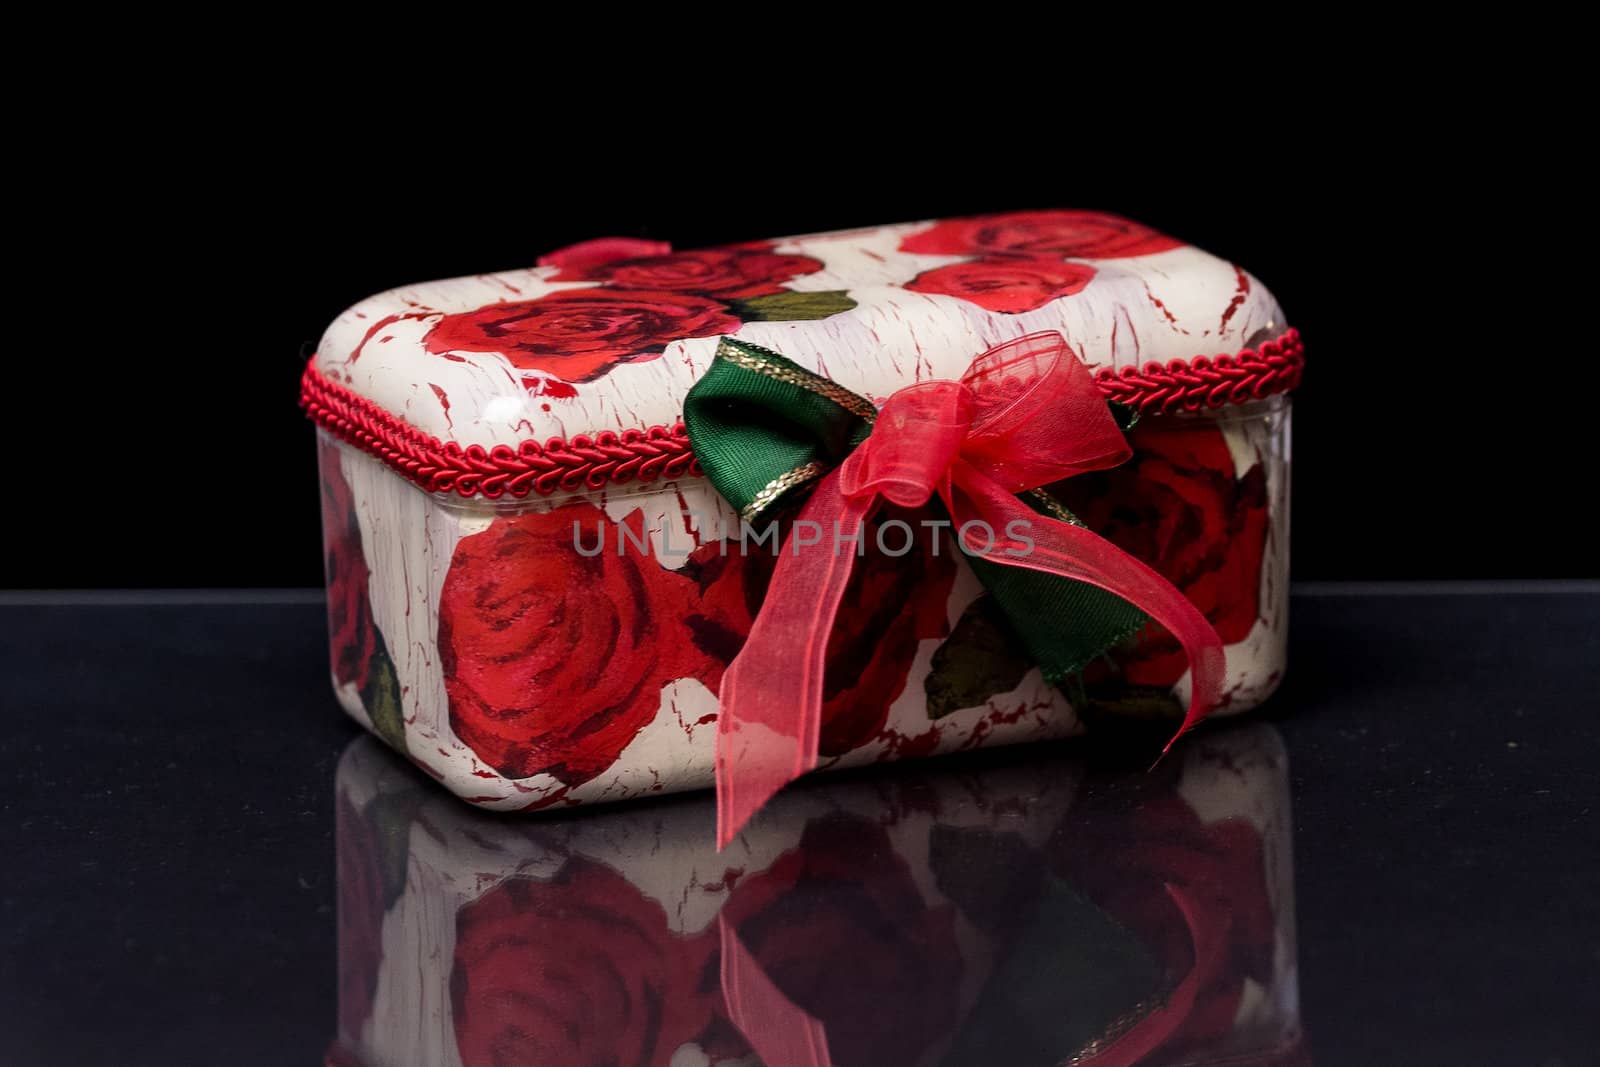 Decorative Decoupage White Rose Box with a red Ribbon







on a reflective black surface with black background